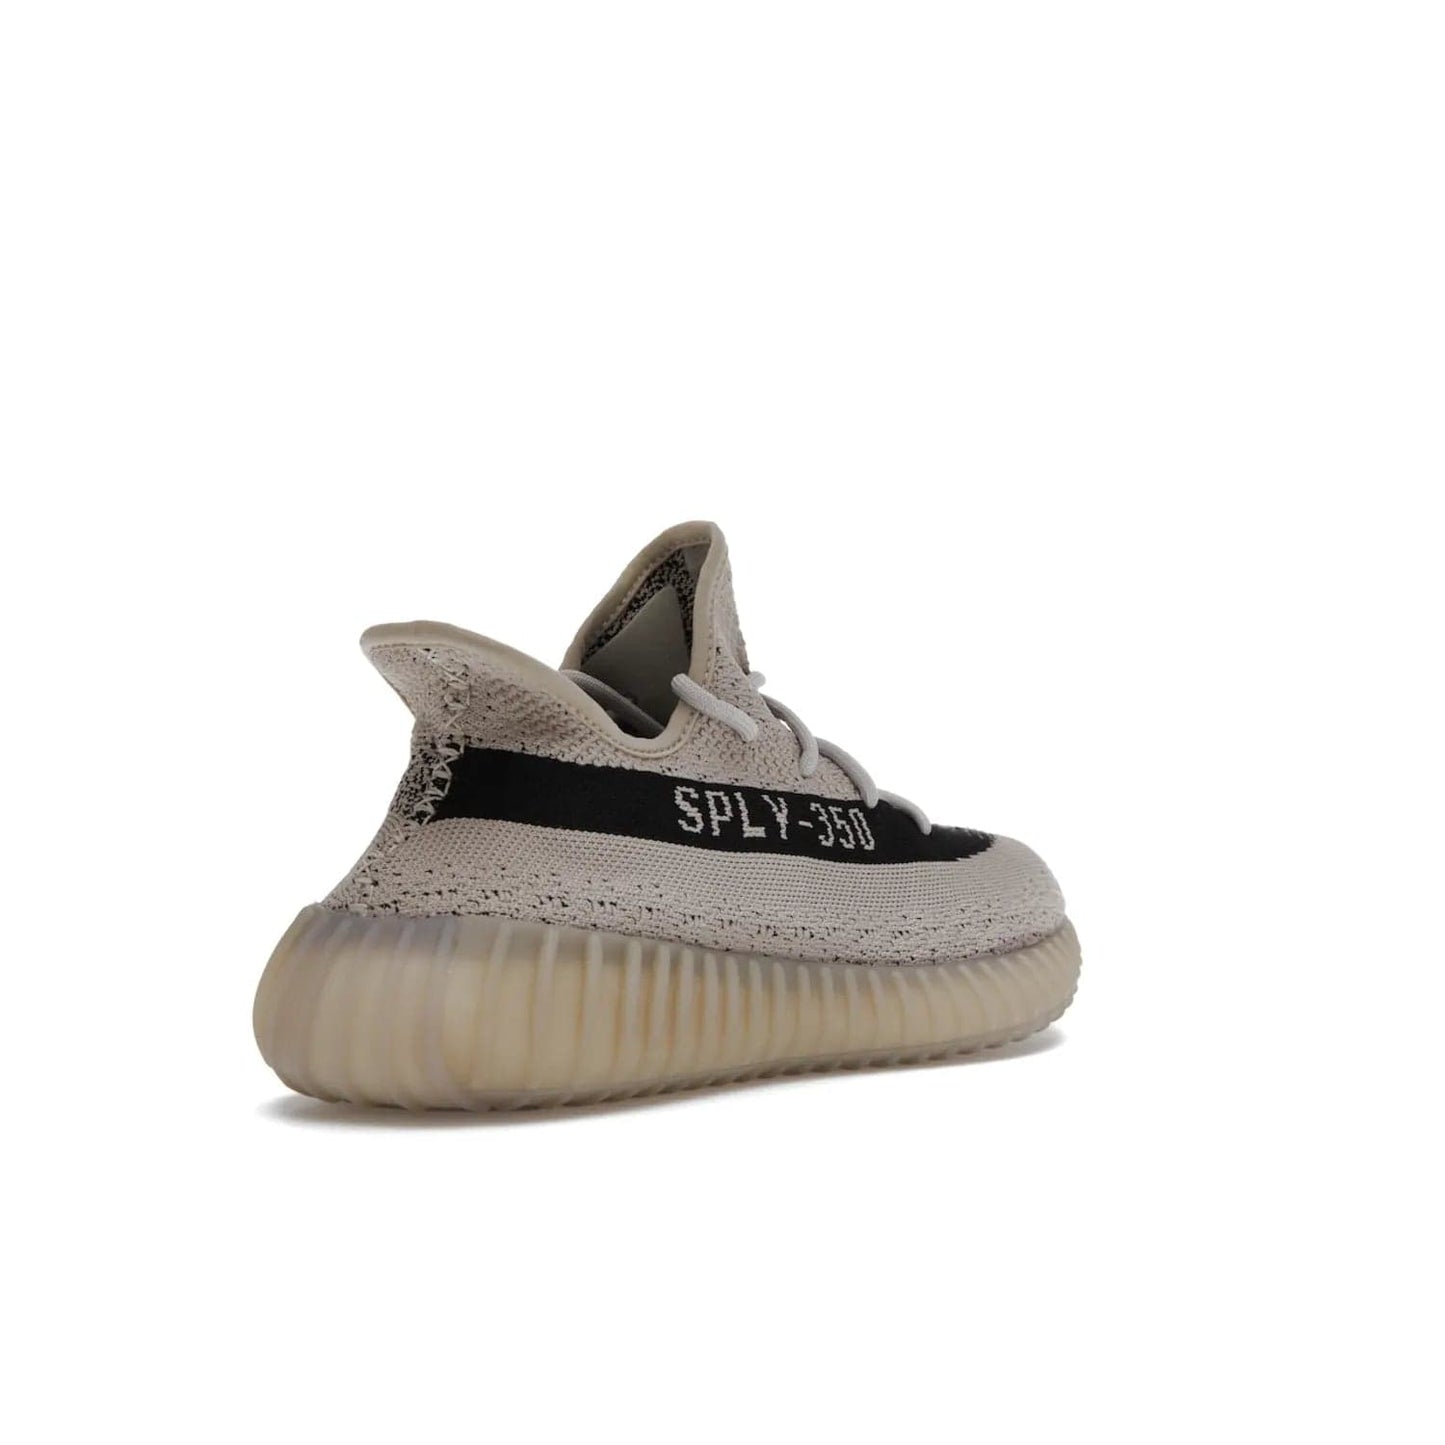 adidas Yeezy Boost 350 V2 Slate - Image 32 - Only at www.BallersClubKickz.com - Adidas Yeezy Boost 350 V2 Slate Core Black Slate featuring Primeknit upper, Boost midsole and semi-translucent TPU cage. Launched on 3/9/2022, retailed at $230.